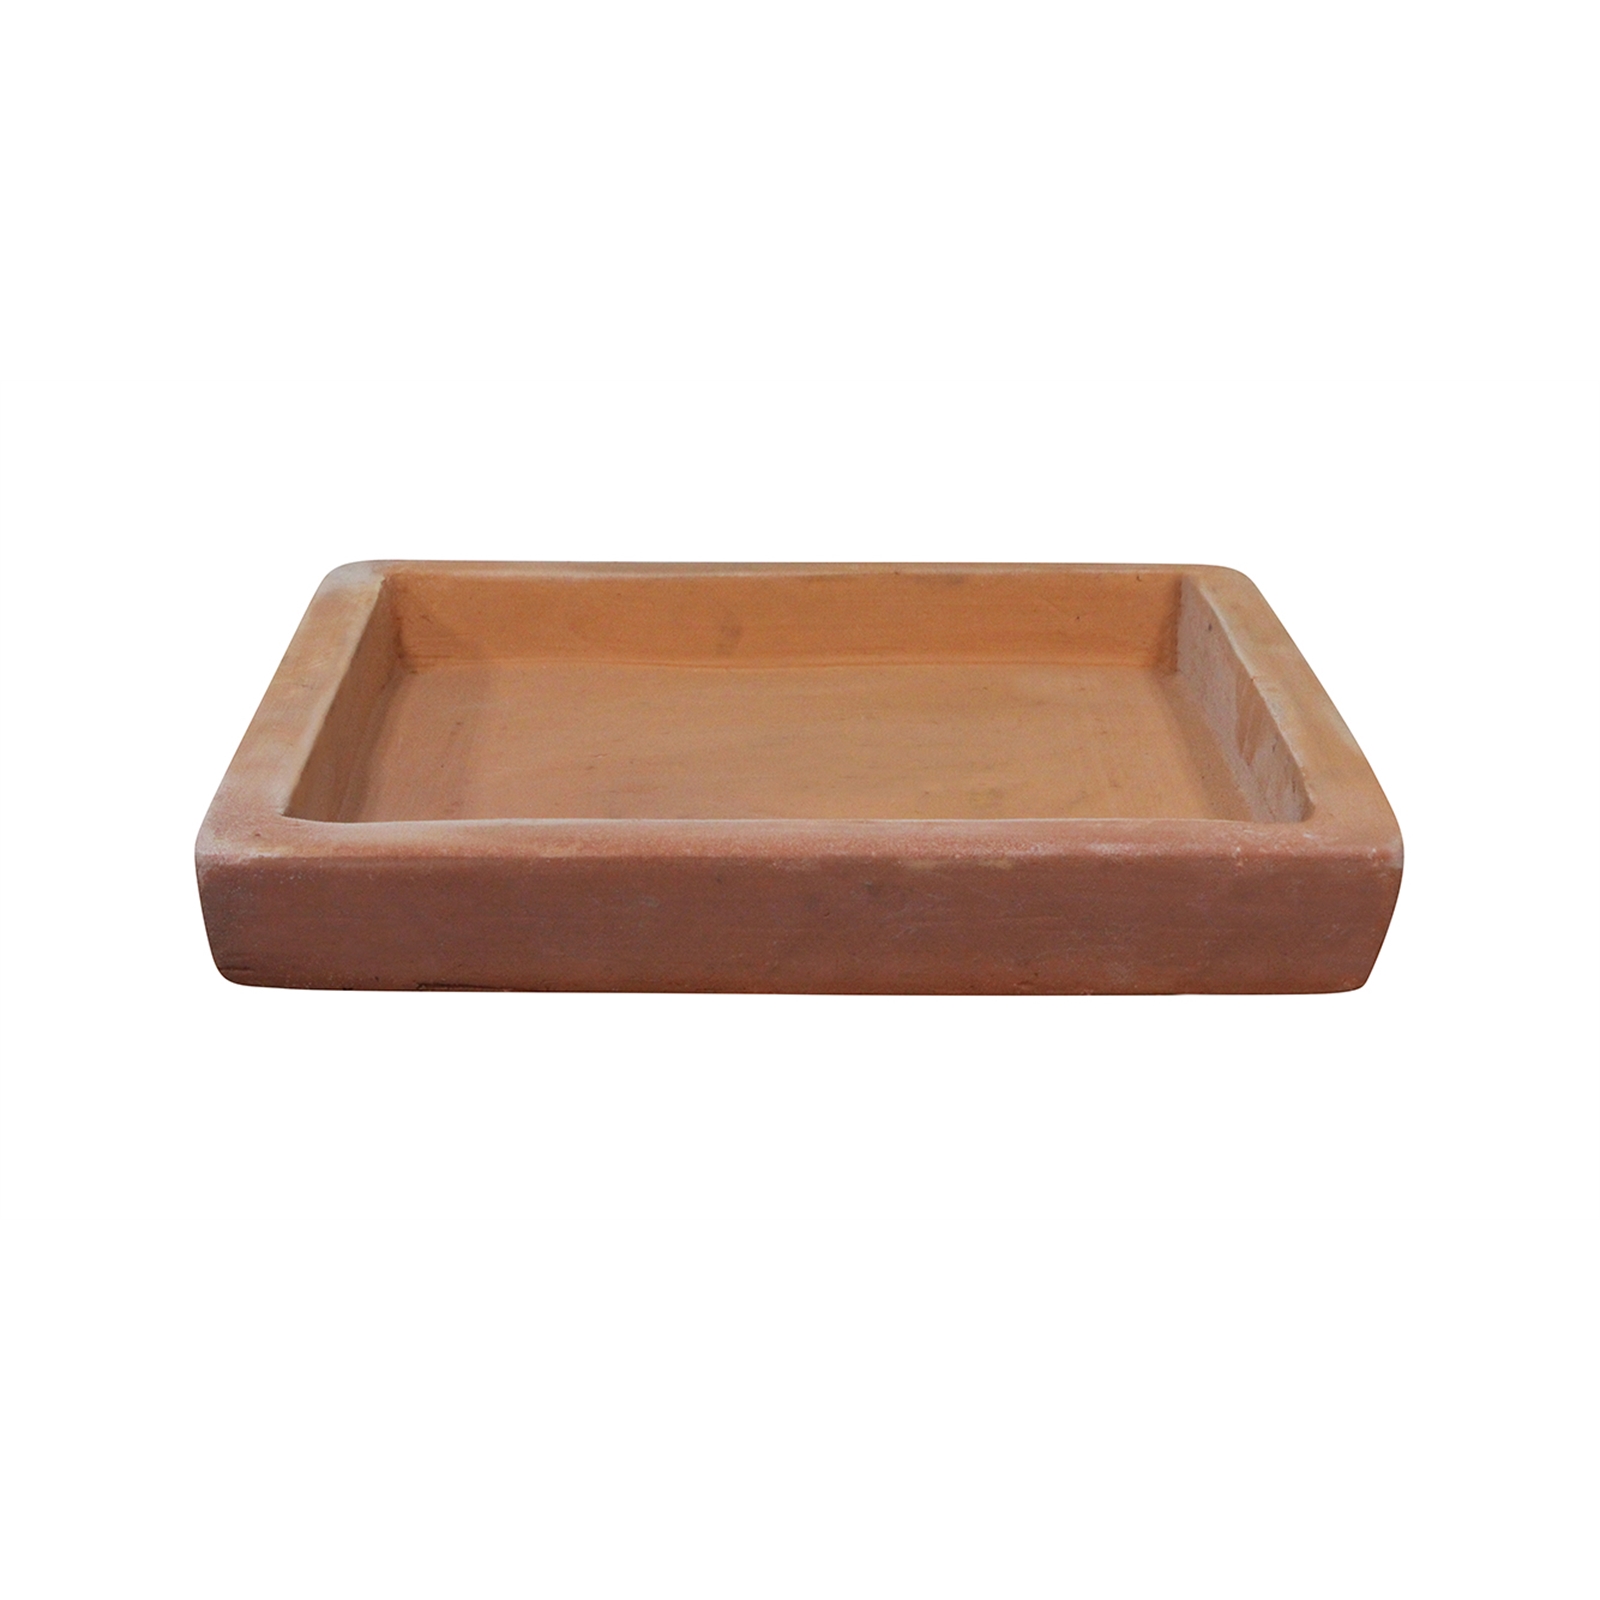 Northcote Pottery 35cm Terracotta CottaSEAL Square Saucer